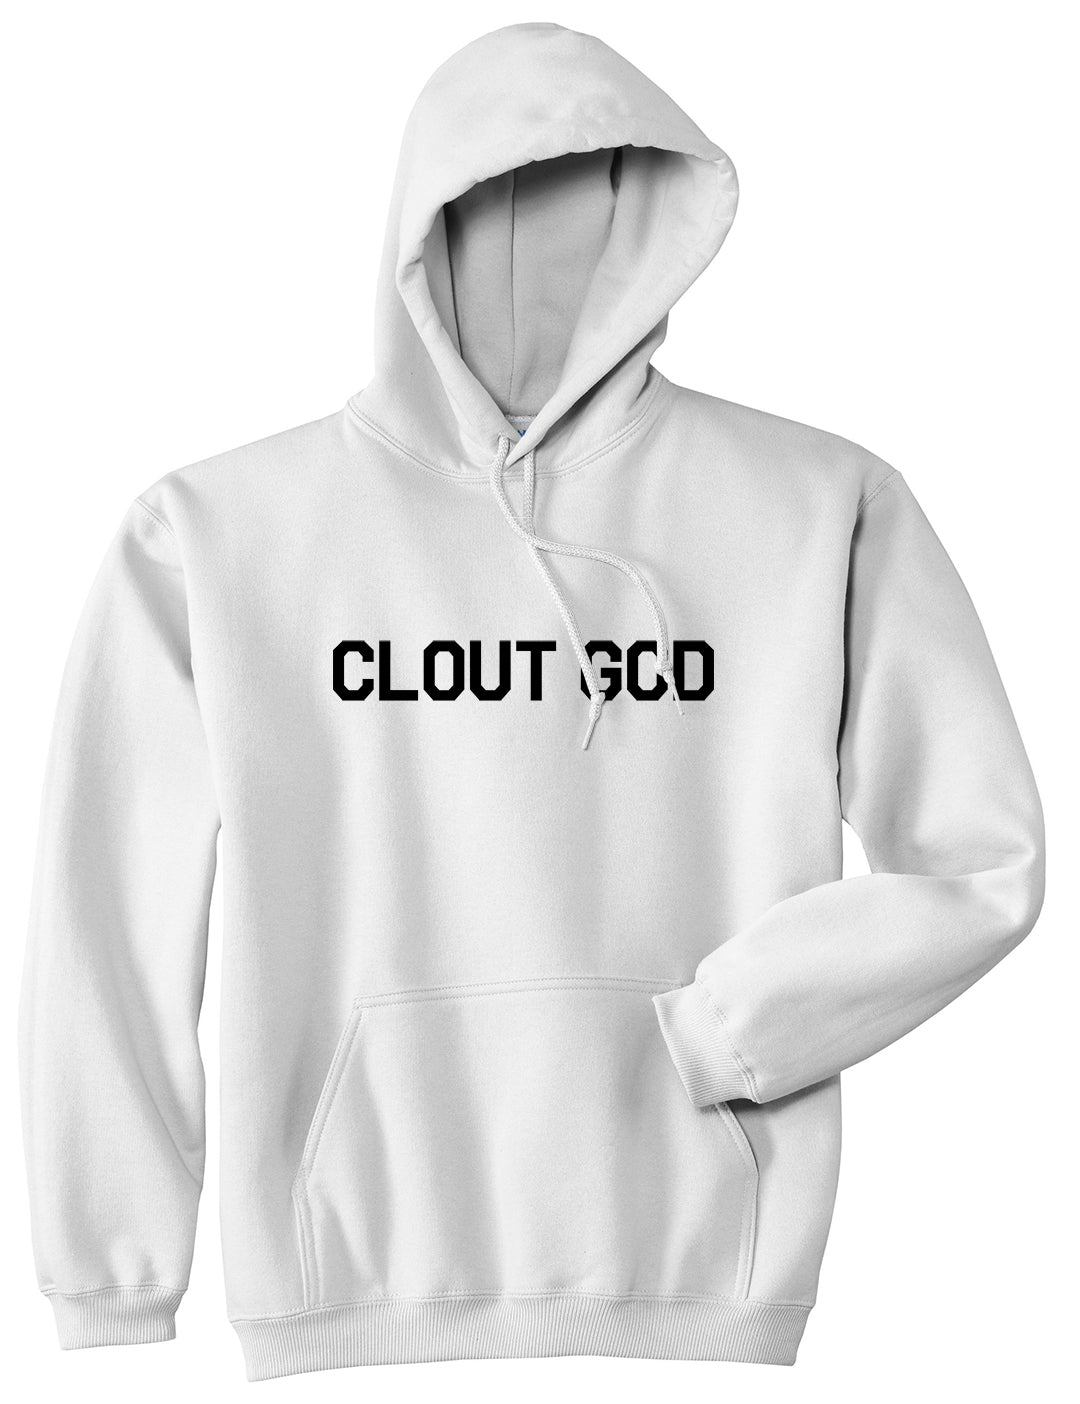 Clout God Mens Pullover Hoodie White by Kings Of NY